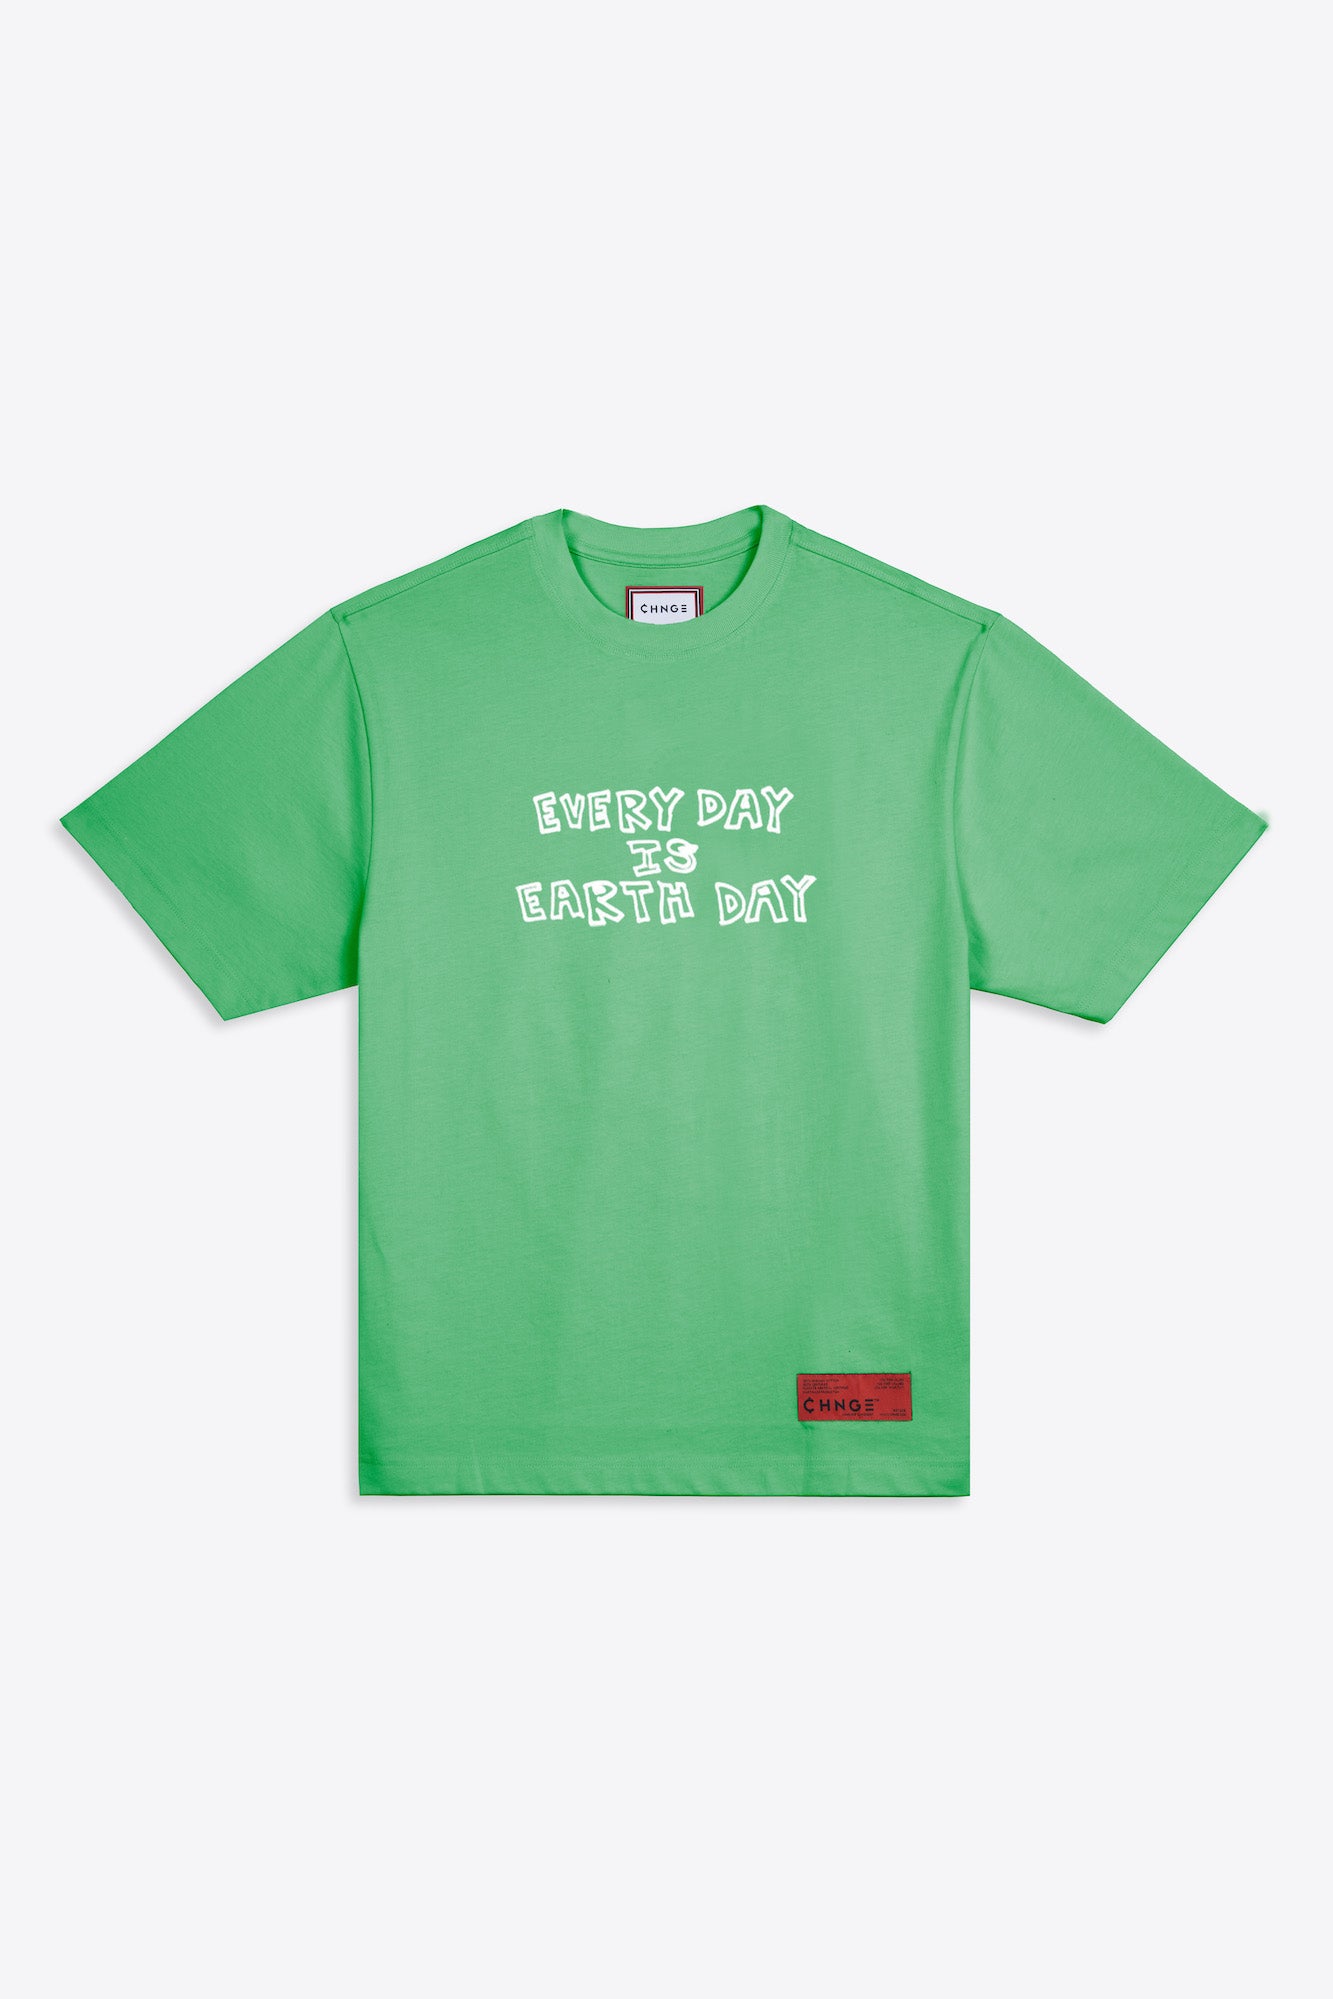 Every (Kelly S/S T-Shirt $42 Day Earth Green) Day